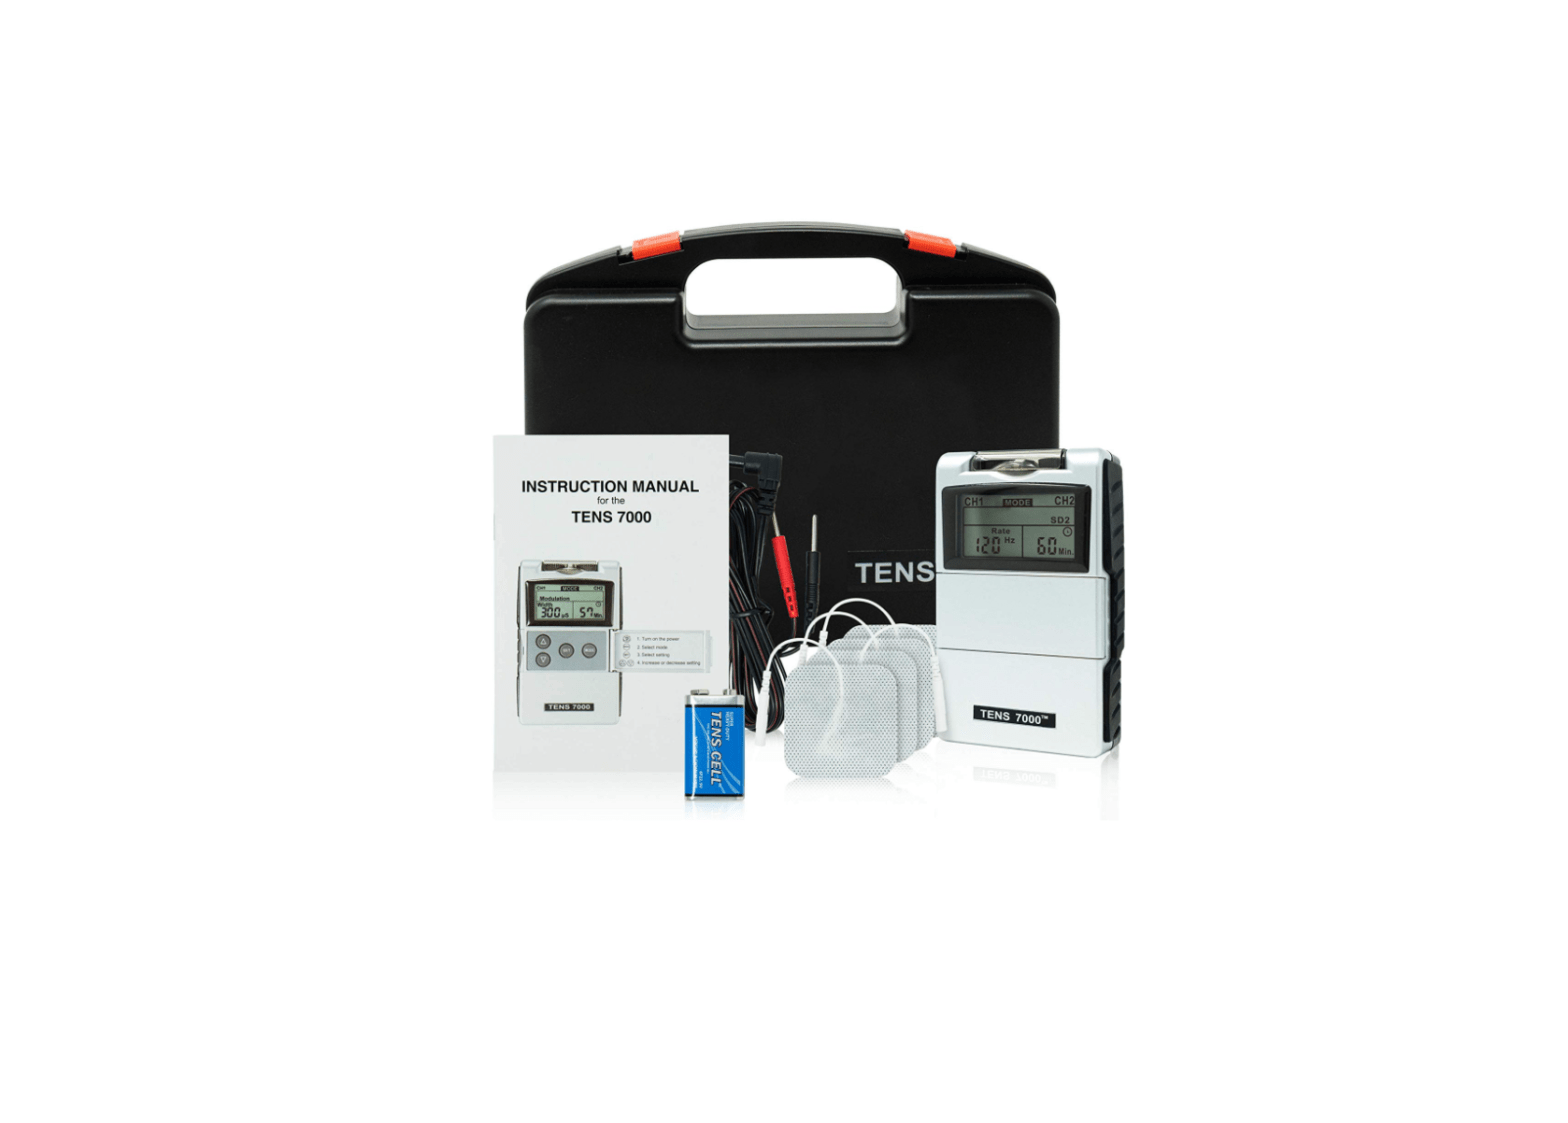 TENS 7000 Digital TENS Unit with Accessories User Manual - Featured image